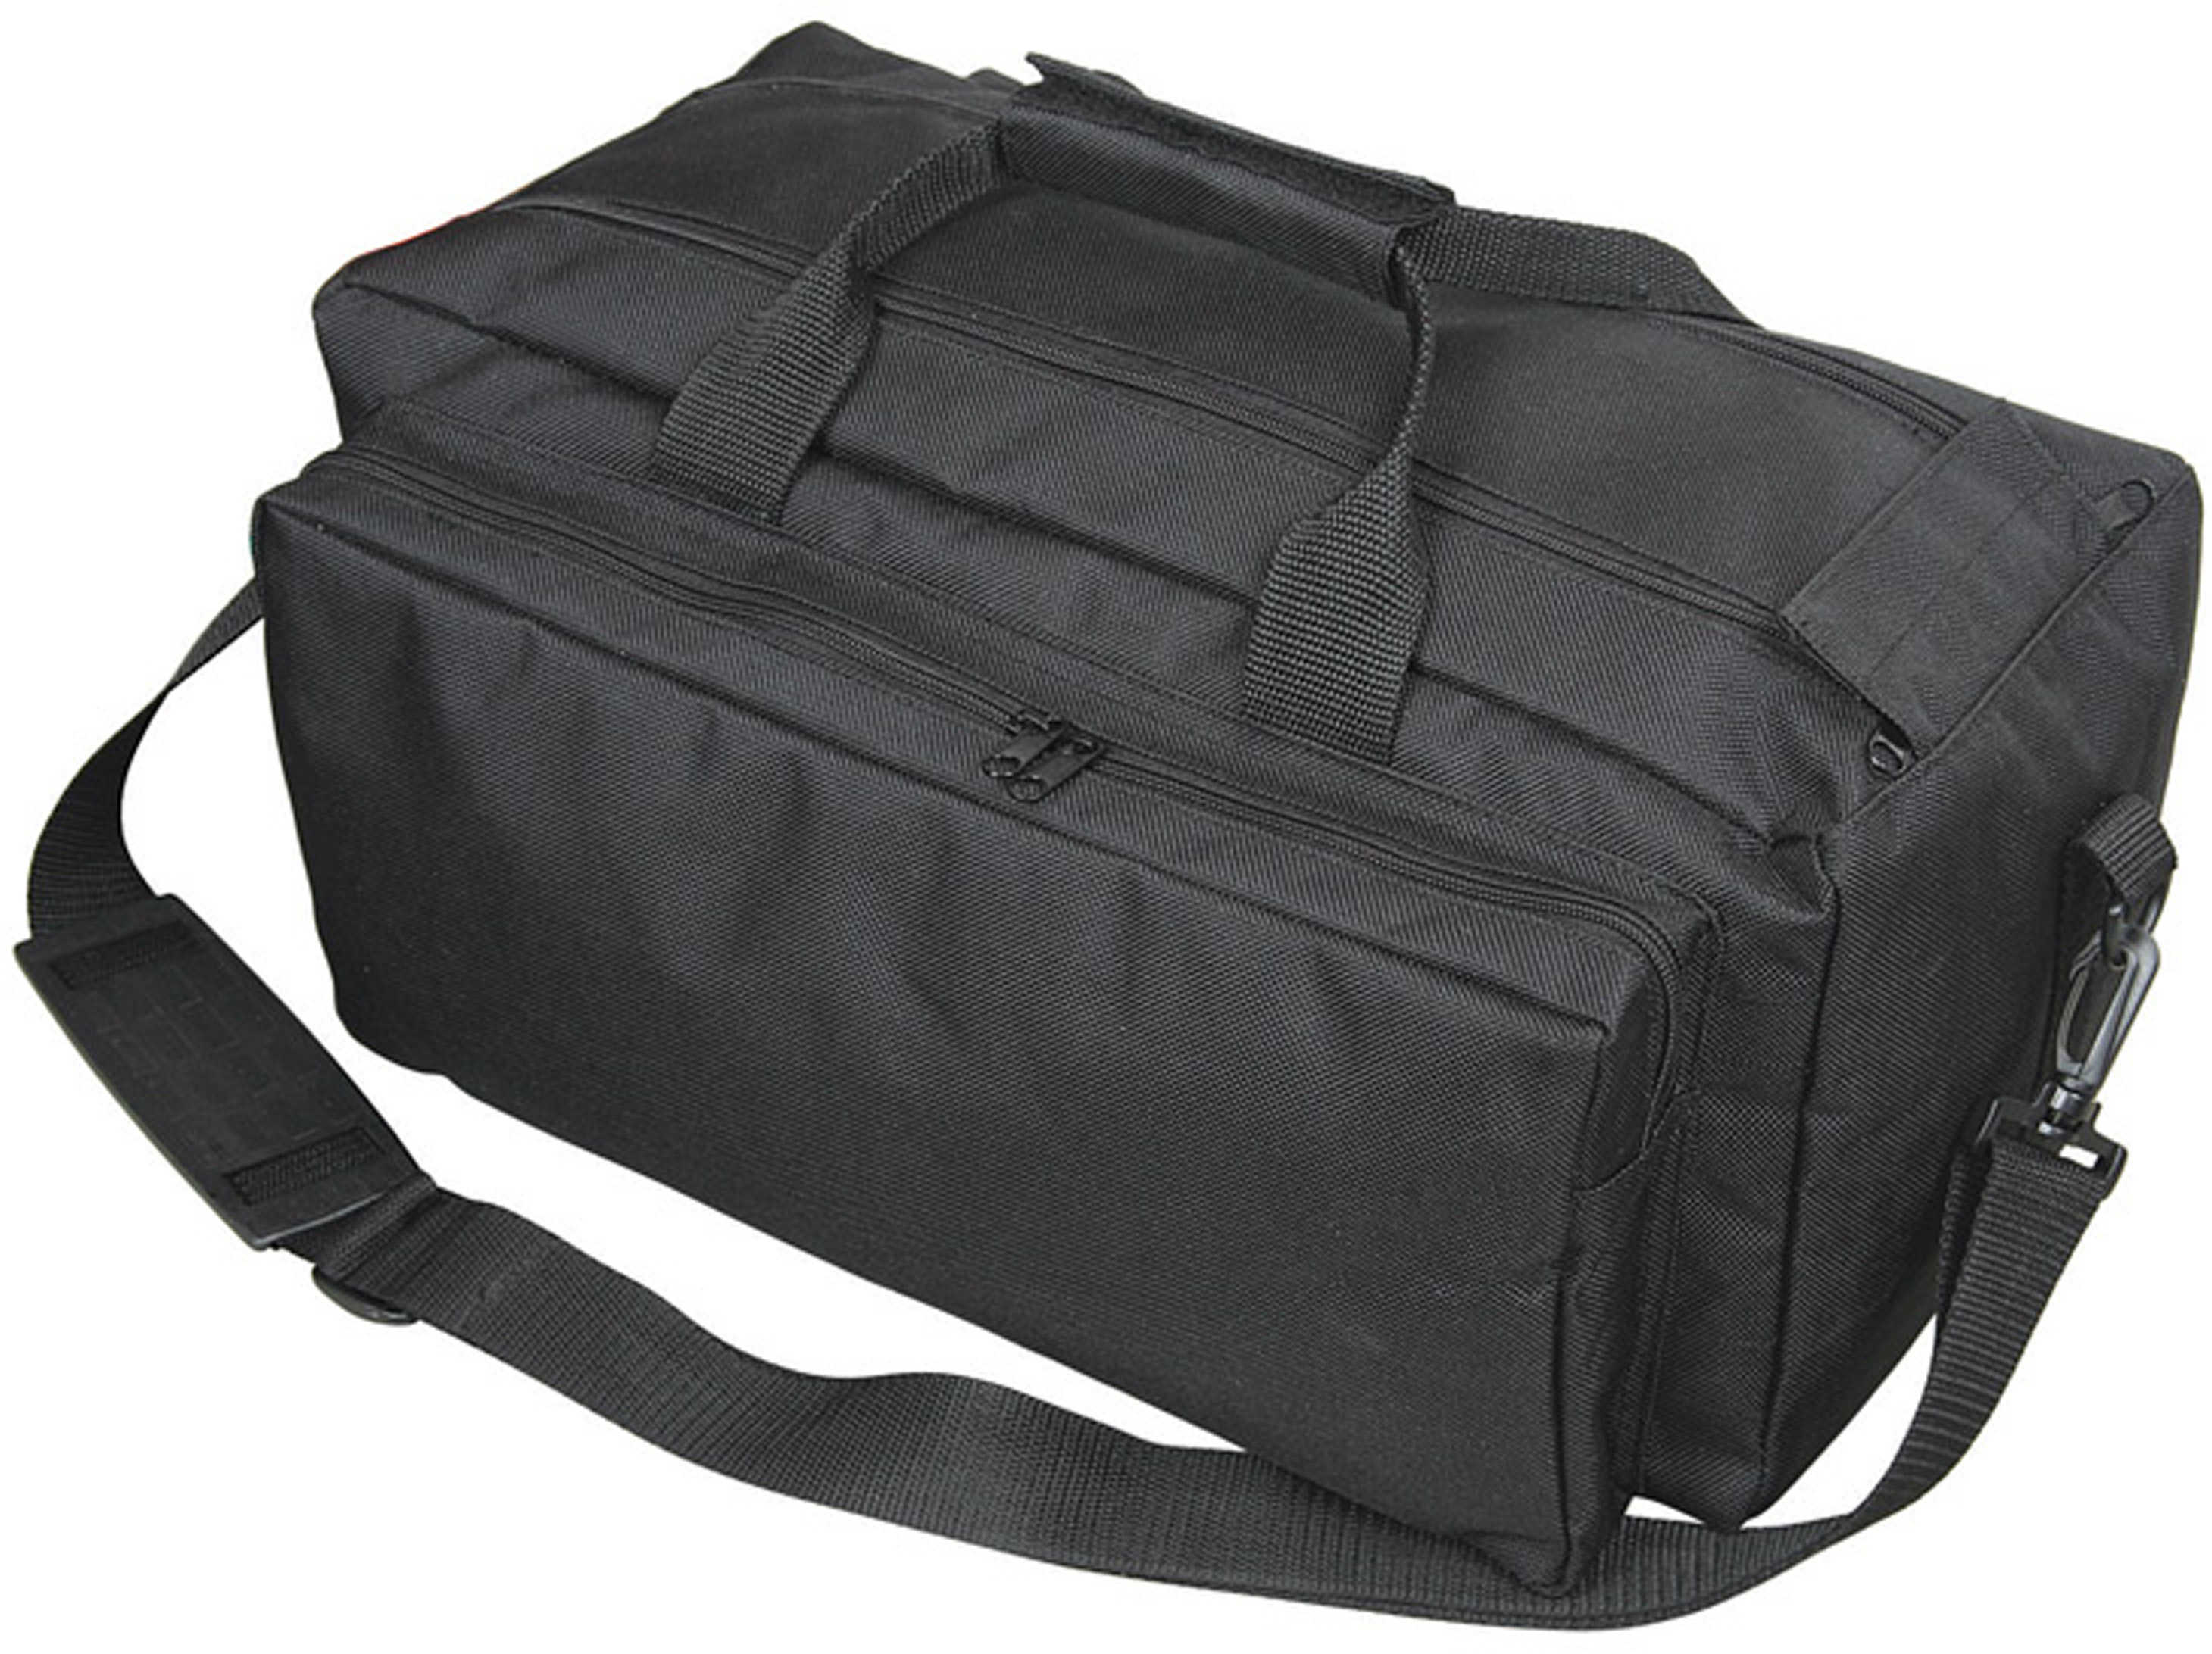 Allen Cases Deluxe Tactical Range Bag Black - Pack of 3 17" x 8" main compartment Removable padded hand 1078